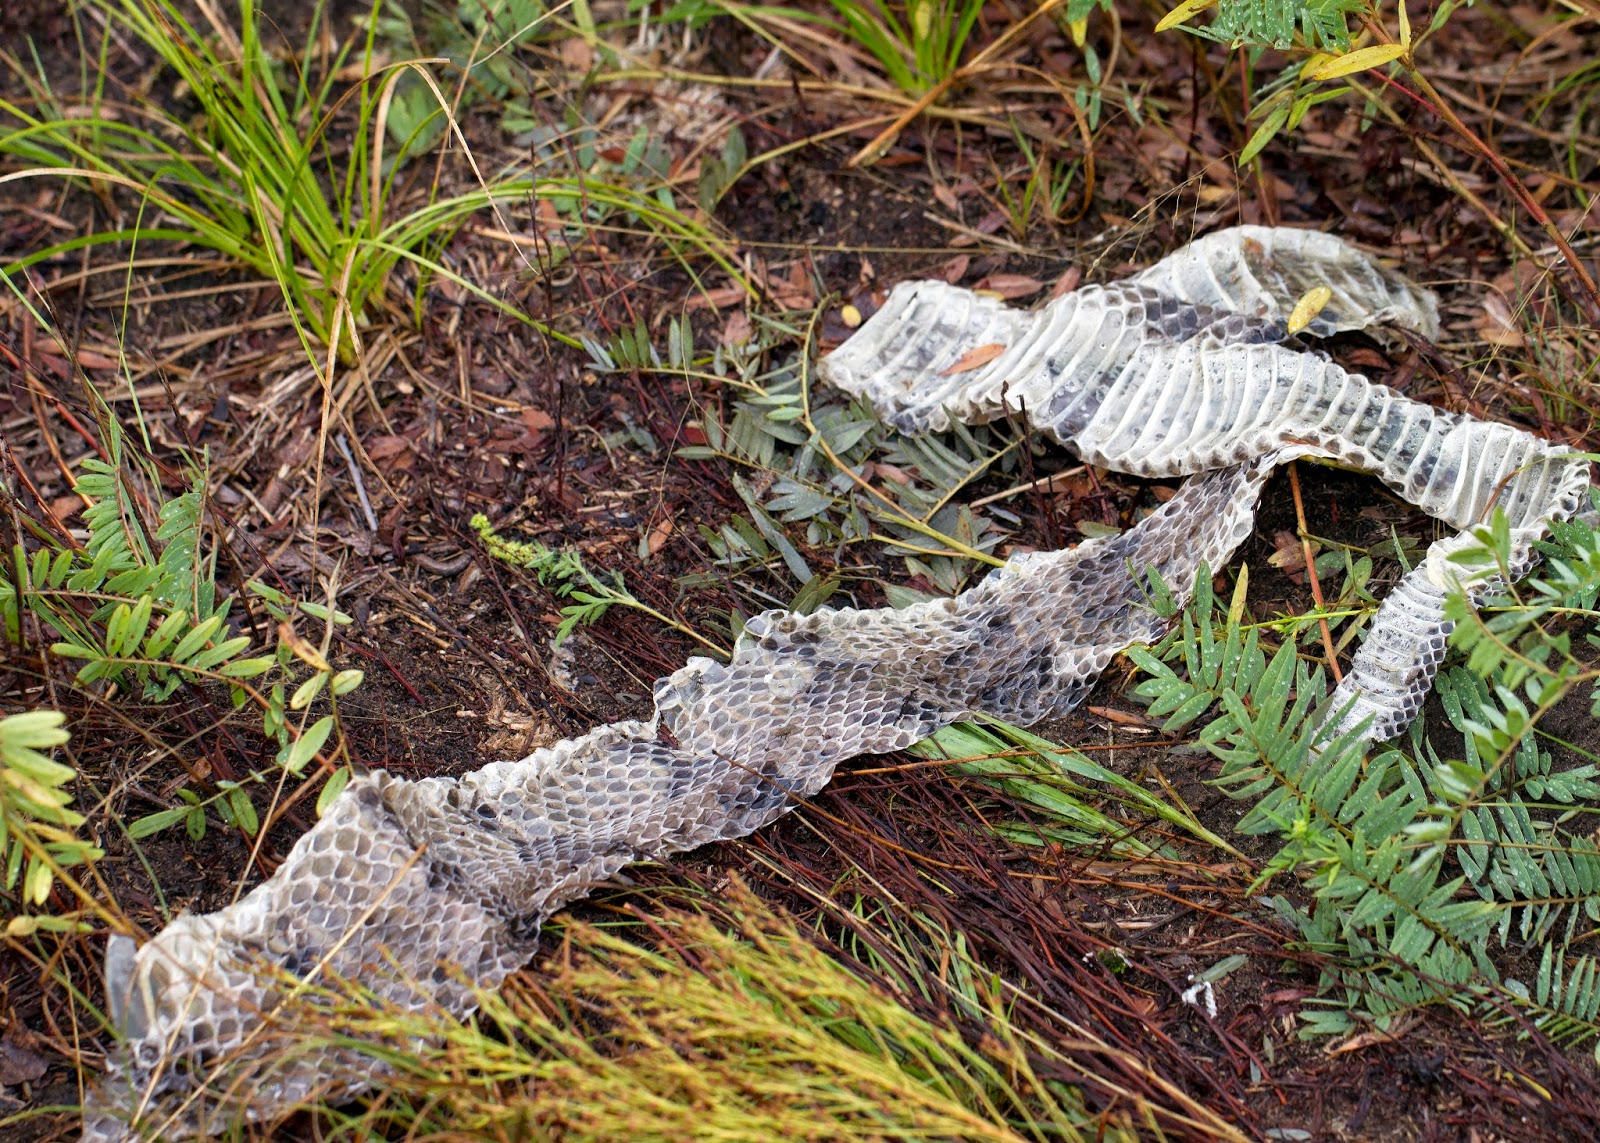 nature curiosity: shed snake skin in a vial - cruelty free